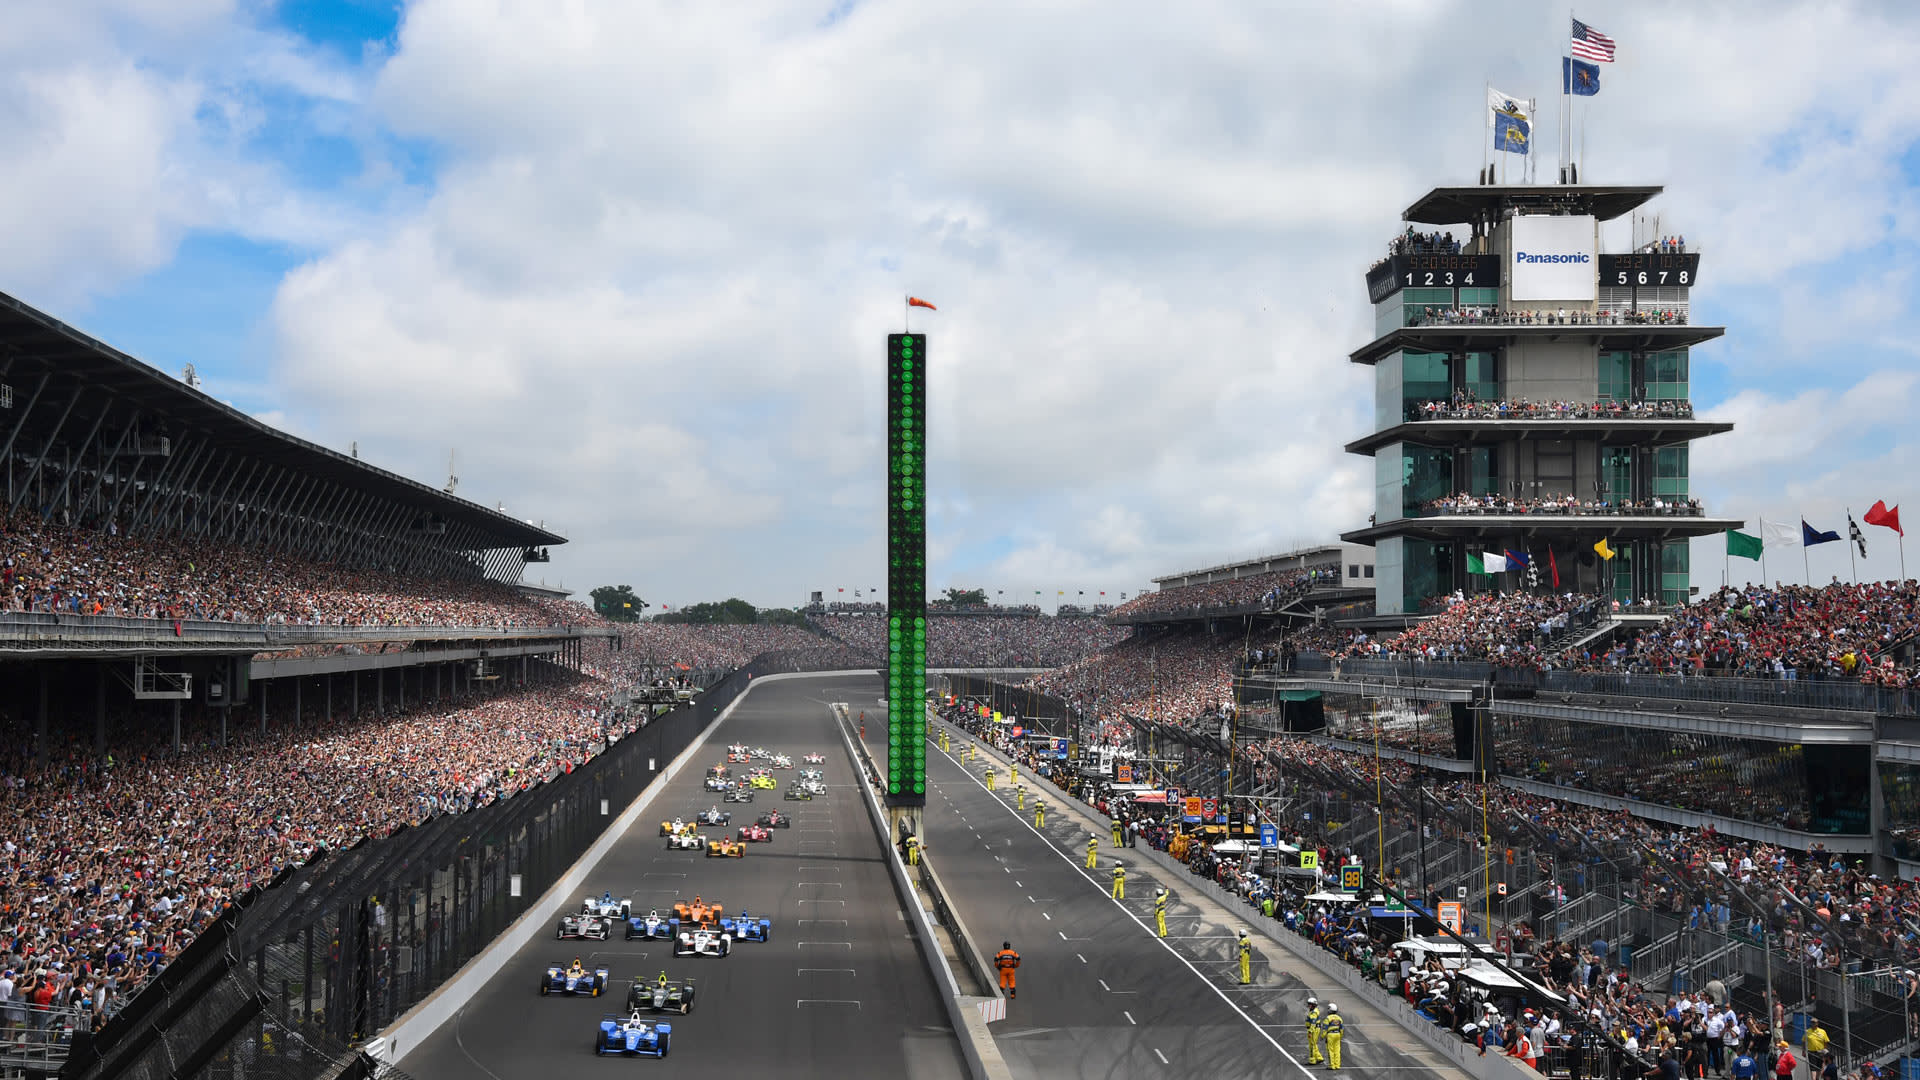 Indy sports venues like the Indianapolis Motor Speedway have special accommodations for visitors